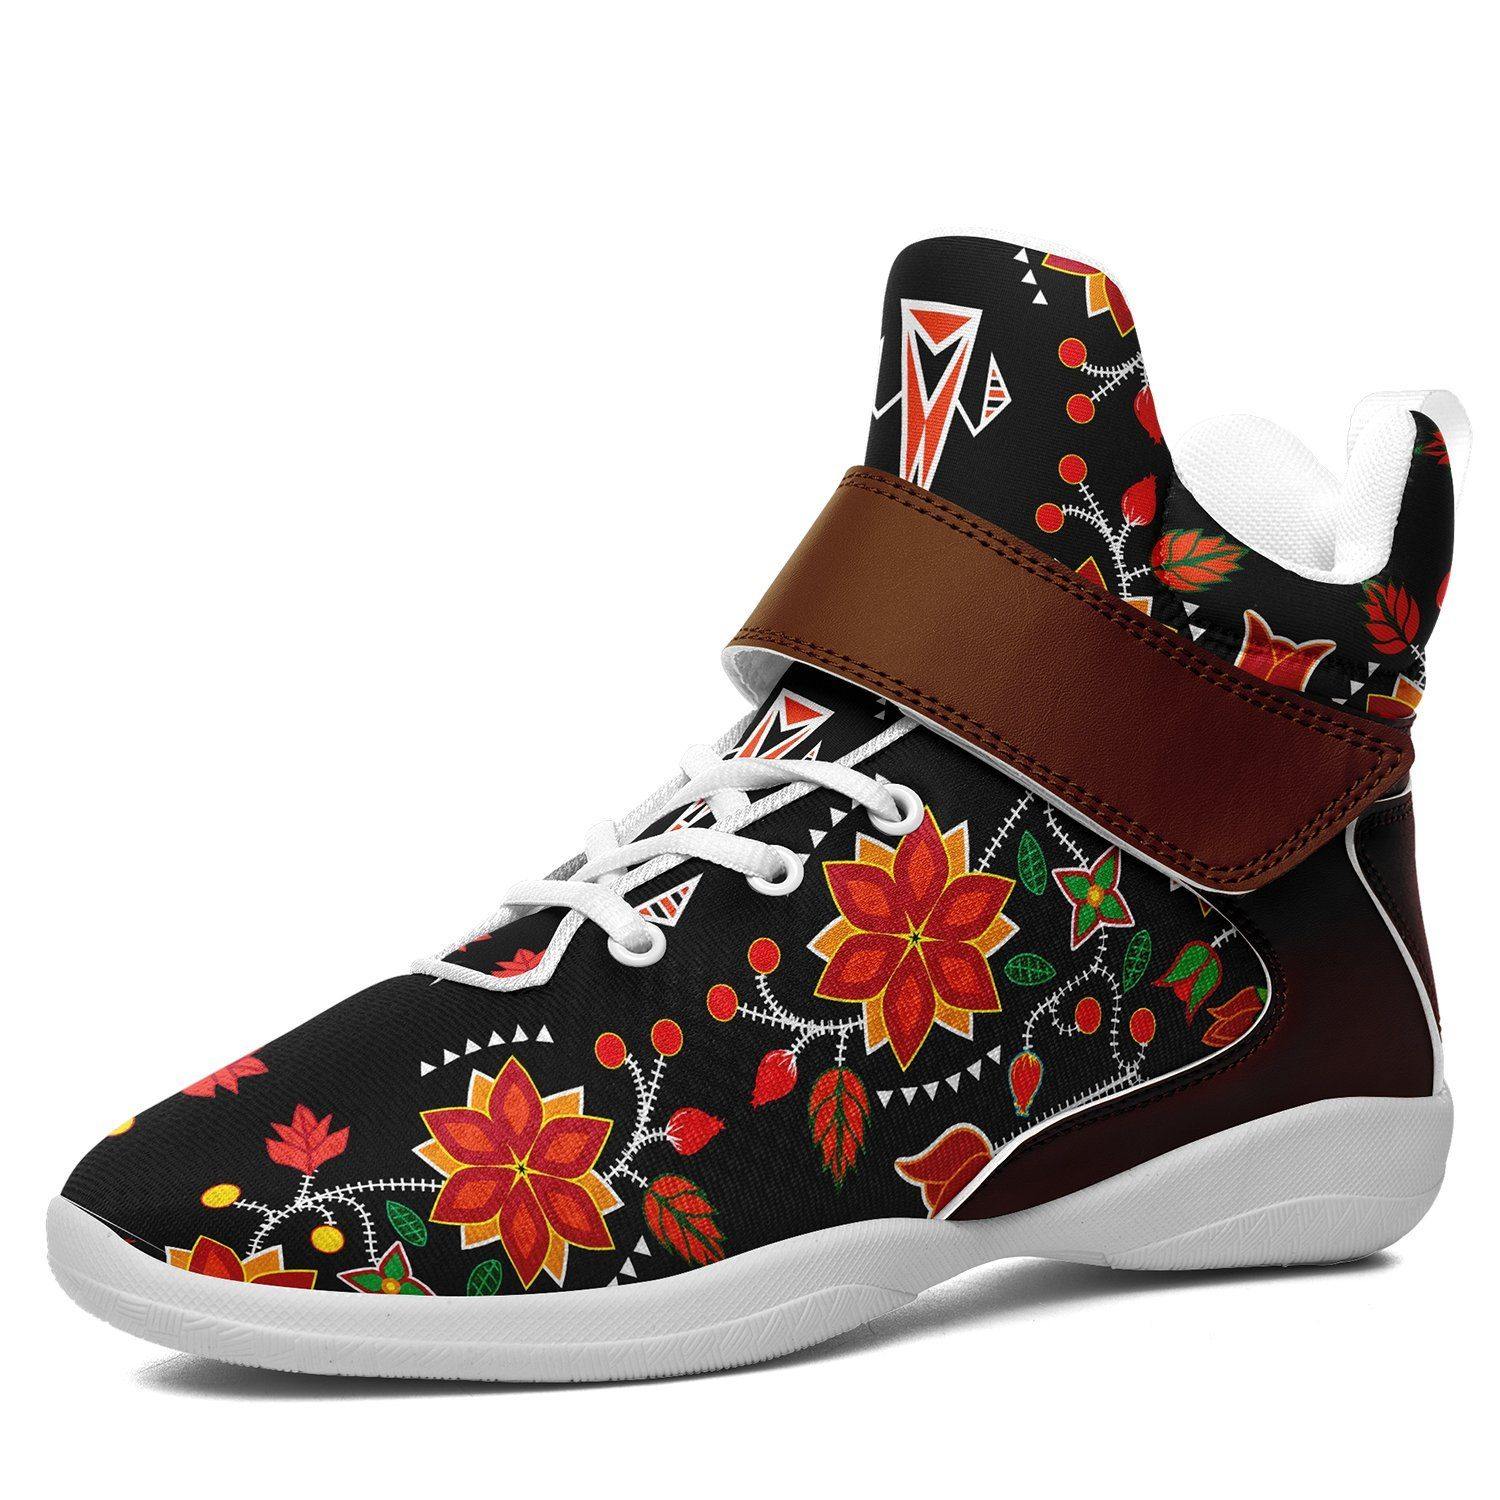 Floral Beadwork Six Bands Ipottaa Basketball / Sport High Top Shoes - White Sole 49 Dzine US Men 7 / EUR 40 White Sole with Brown Strap 